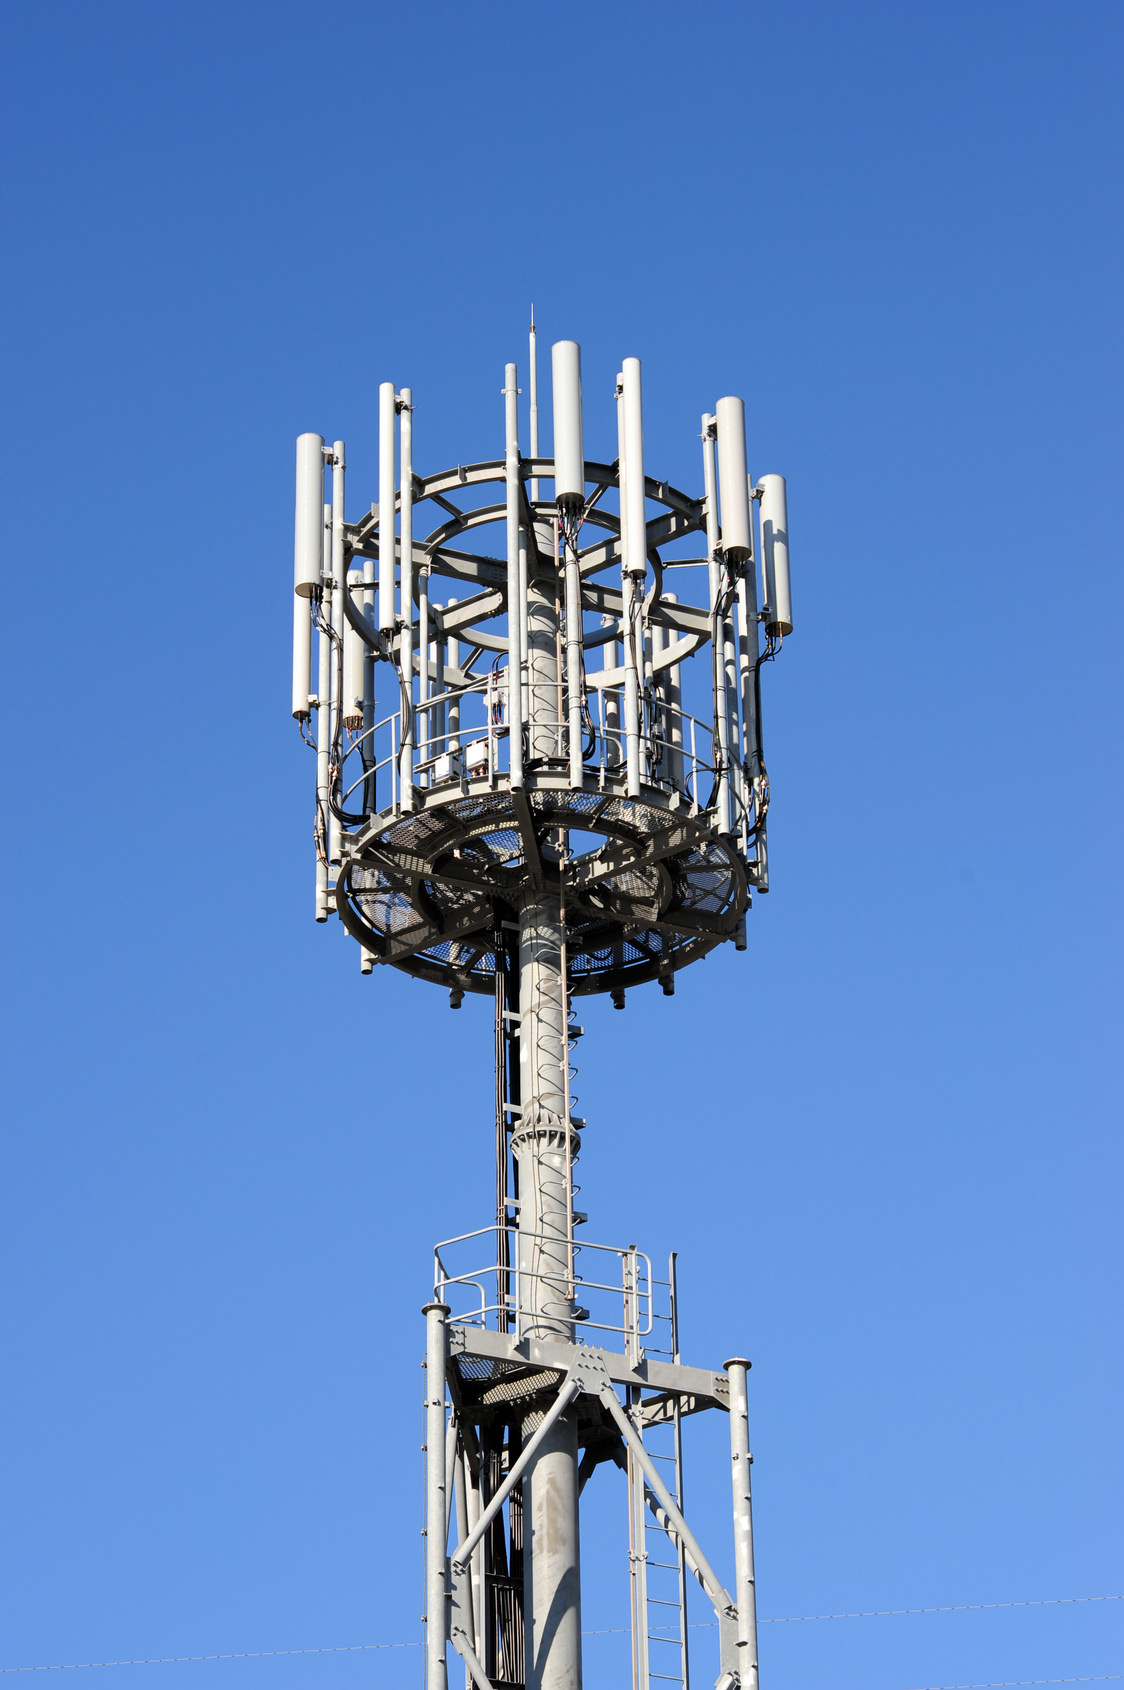 3.5 GHz Spectrum: An Opportunity for the U.S. to Lead in Wireless Innovation